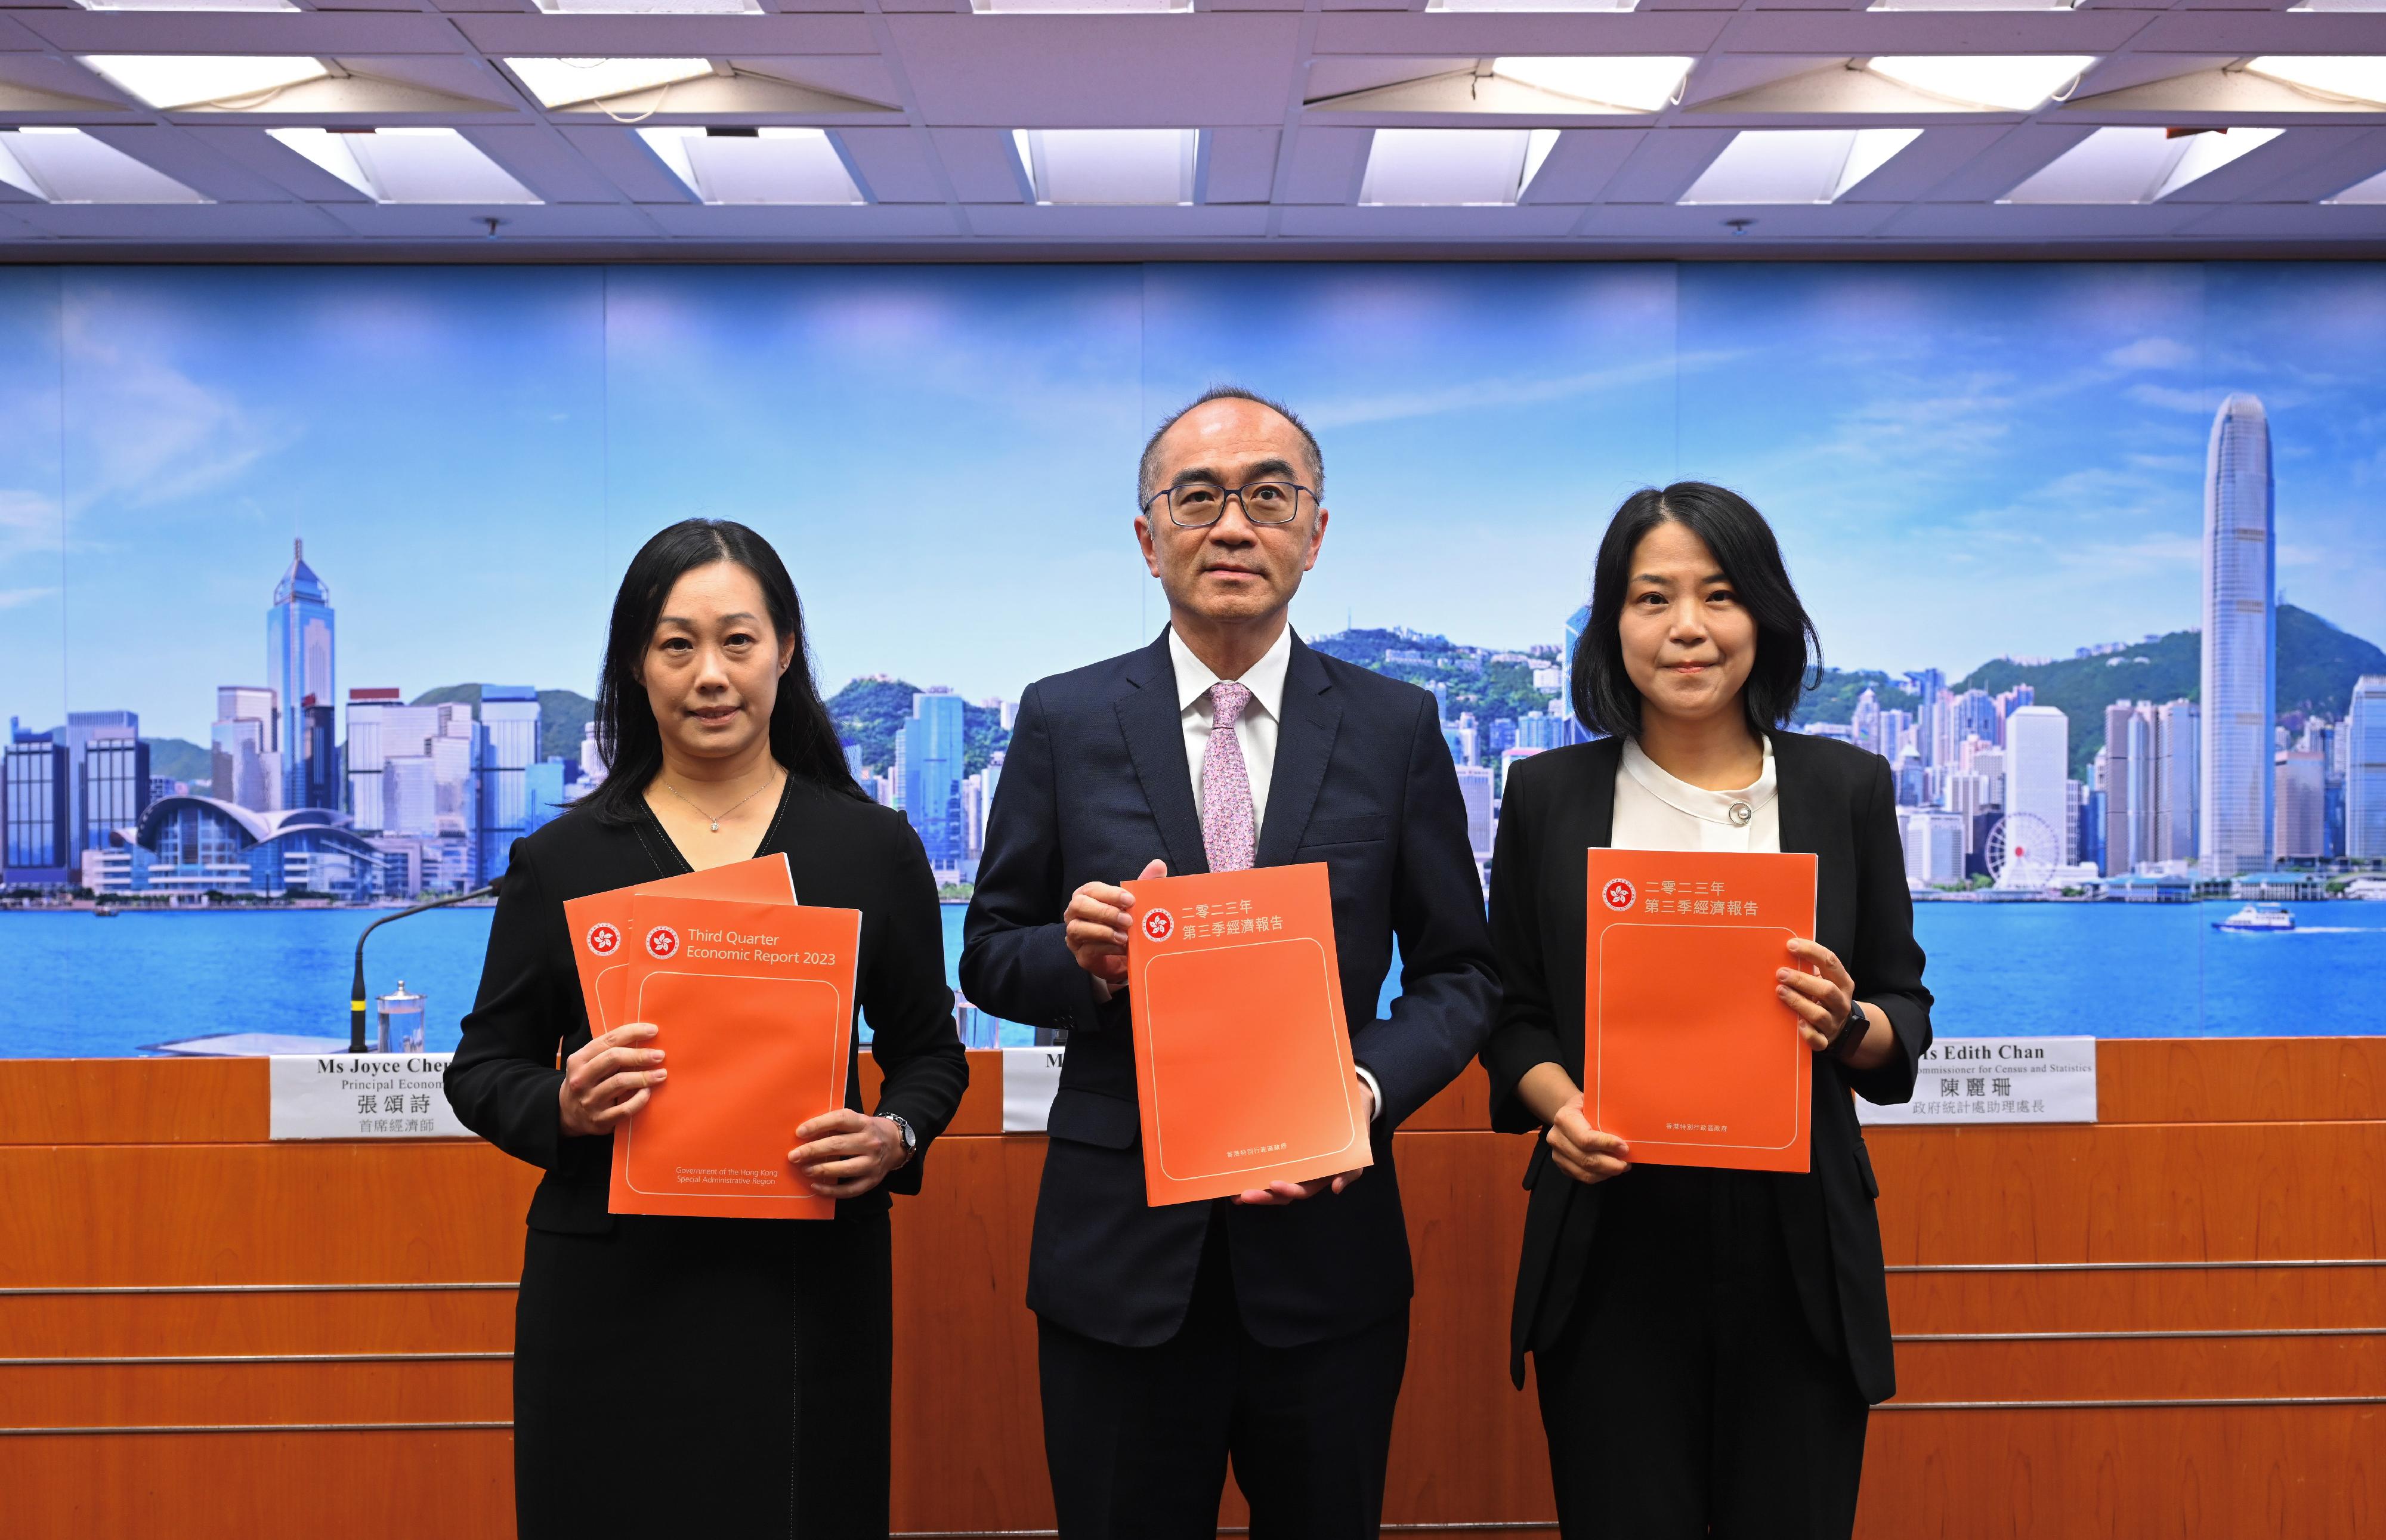 The Government Economist, Mr Adolph Leung (centre), presents the Third Quarter Economic Report 2023 at a press conference today (November 10). Also present are Principal Economist Ms Joyce Cheung (left) and Assistant Commissioner for Census and Statistics Ms Edith Chan (right).